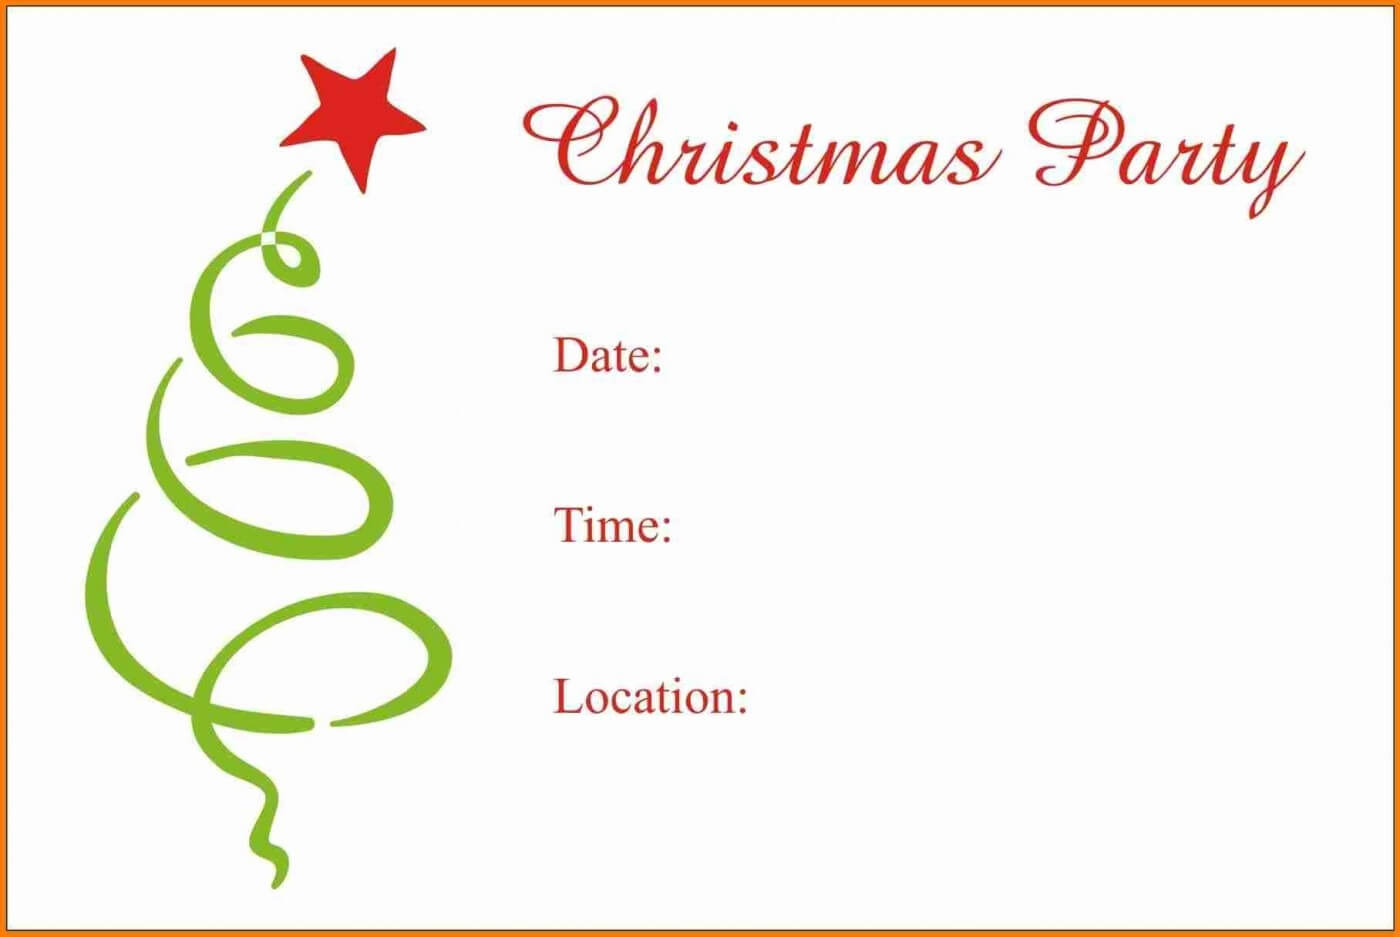 Children's Christmas Party Invitation Templates Free Regarding Free Christmas Invitation Templates For Word